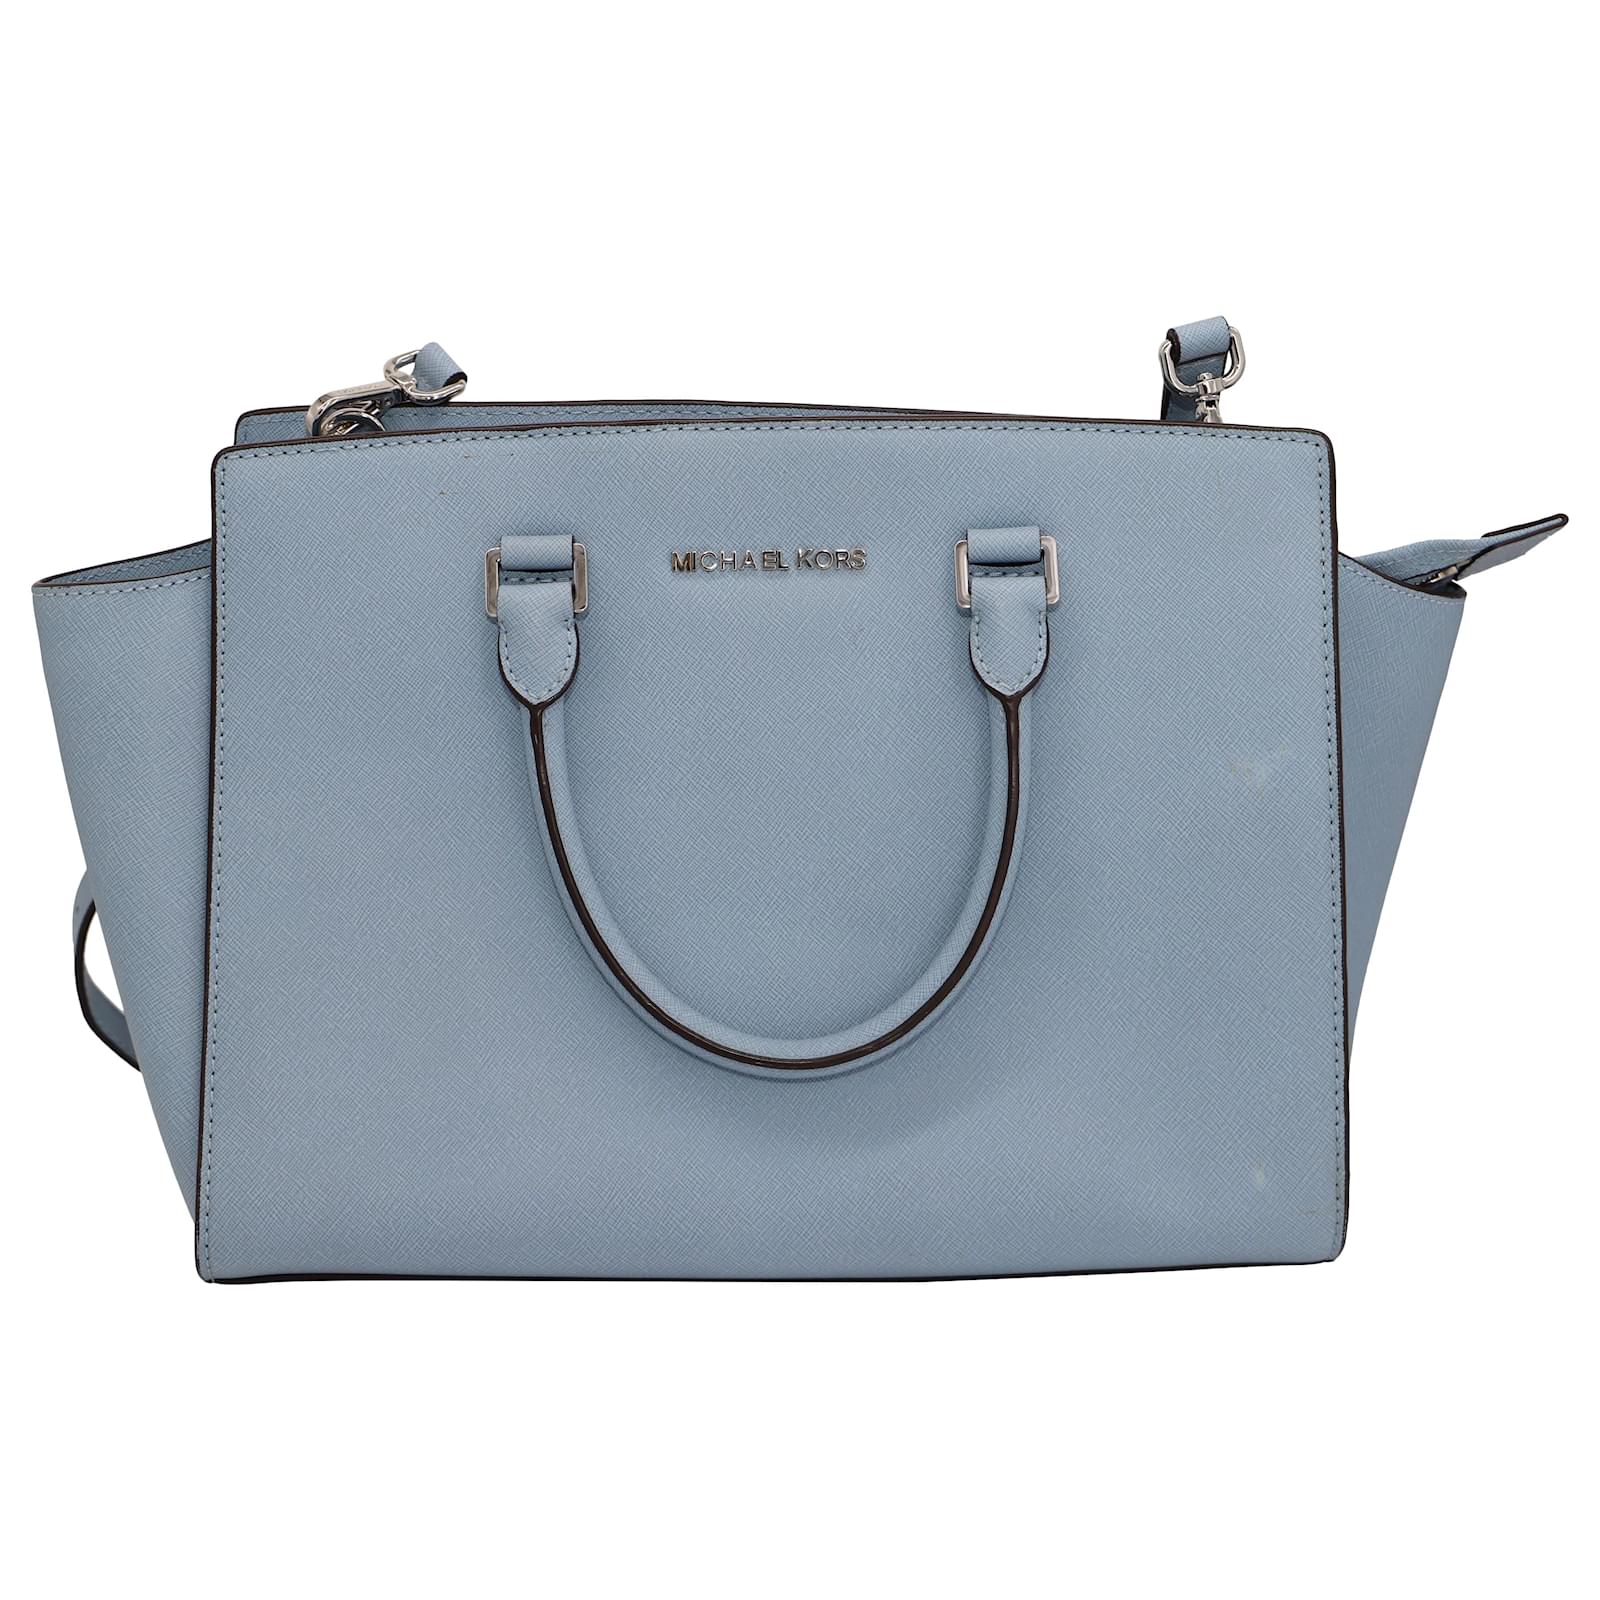 Michael Kors Selma Large Textured Tote Bag in Blue Leather Light